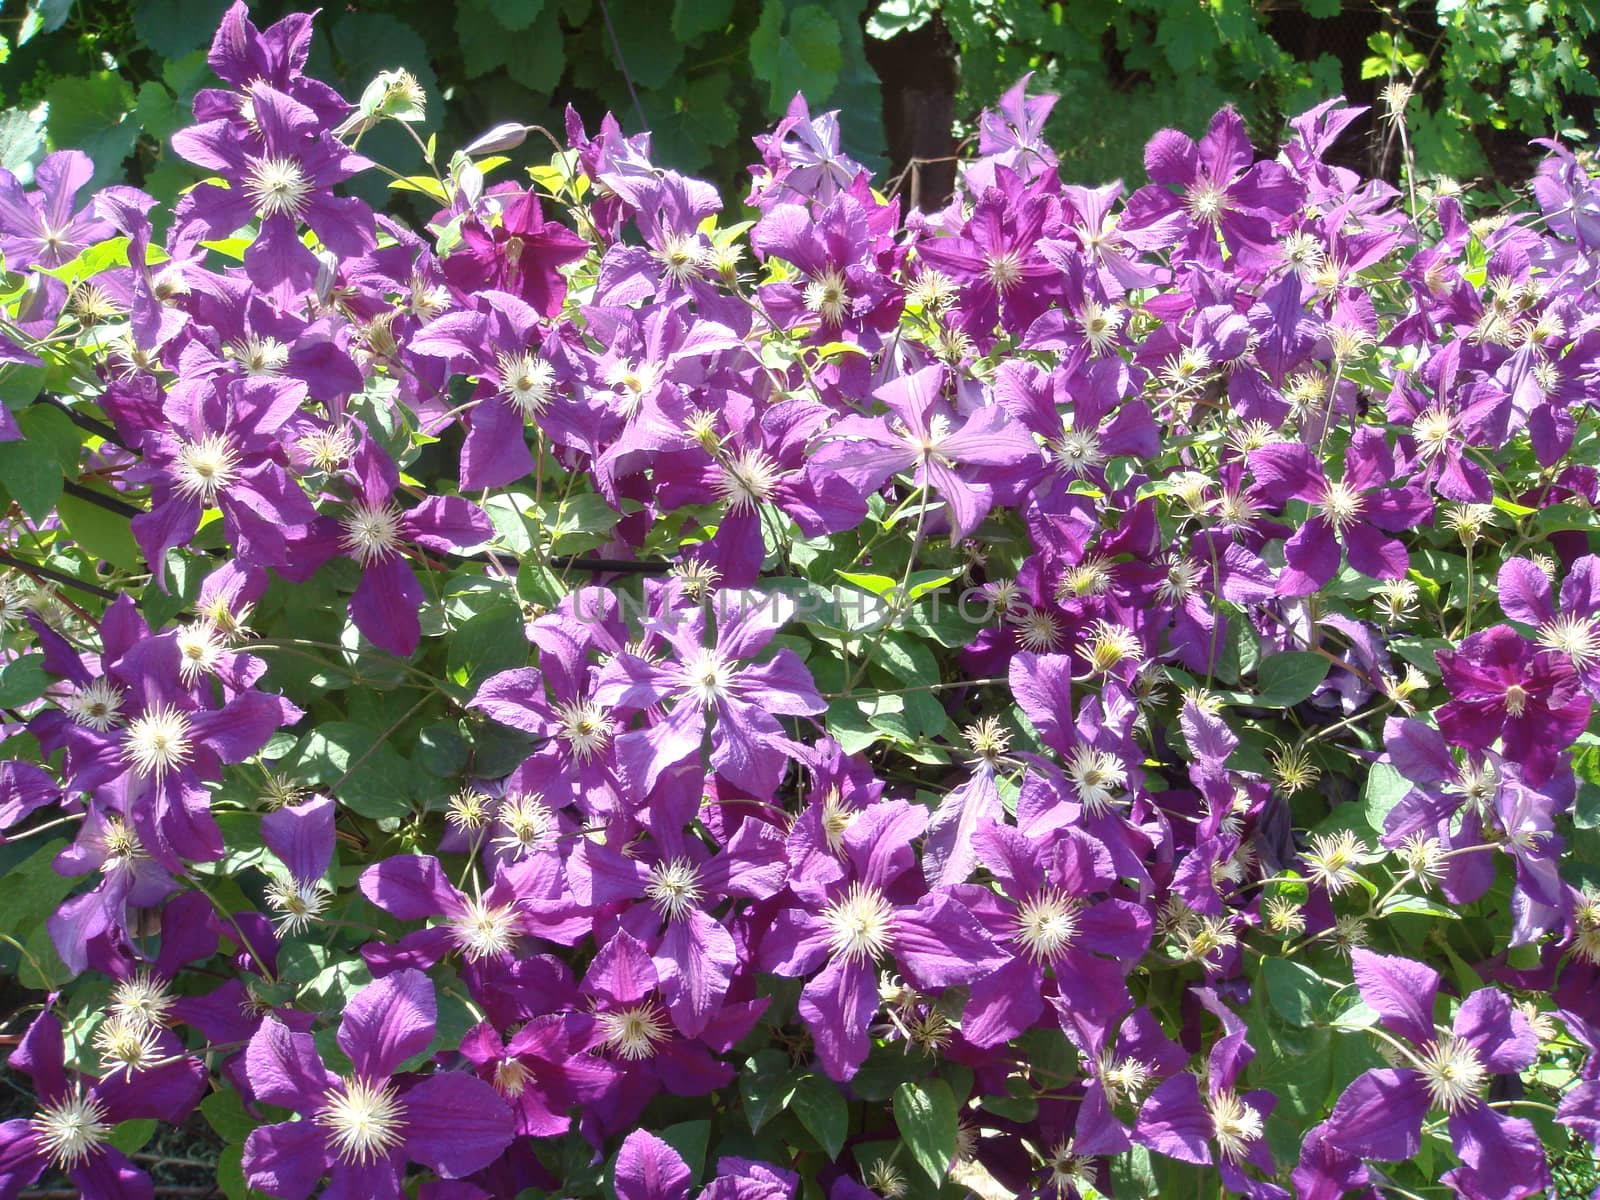 Purple flowers in the garden inspire a good spring mood                               